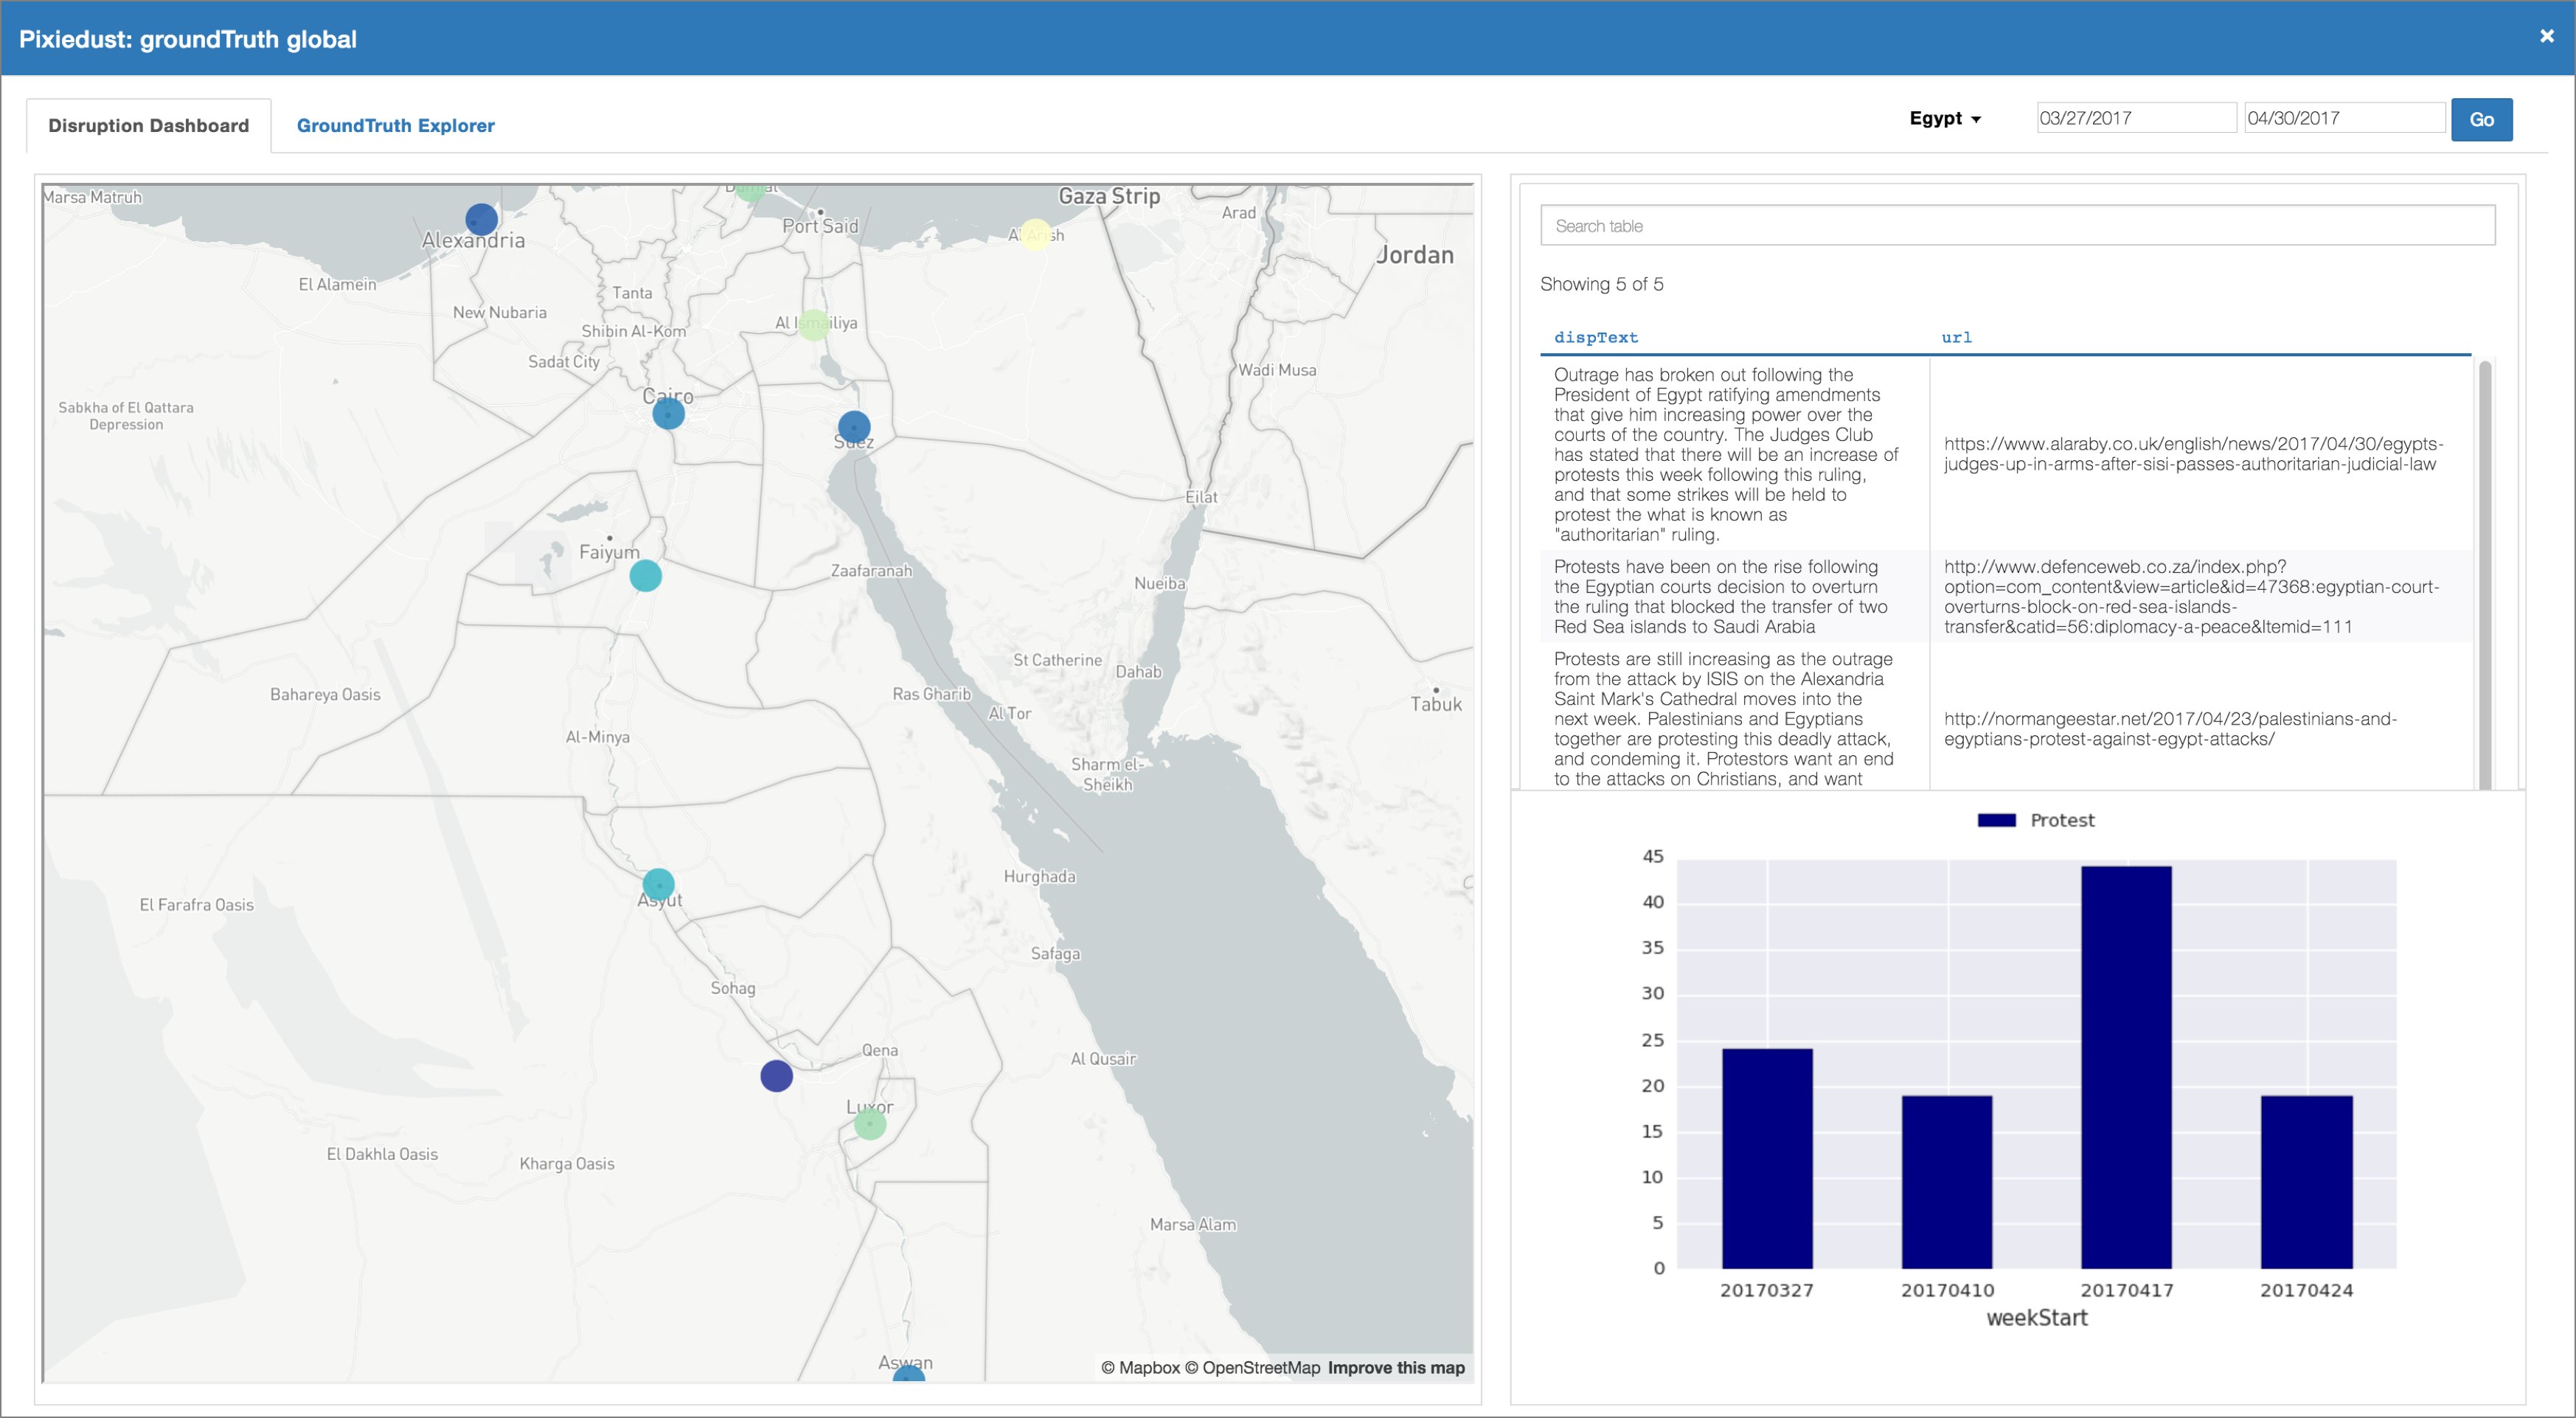 Screenshot of a PixieApp showing data mapped to an area of the Middle East.